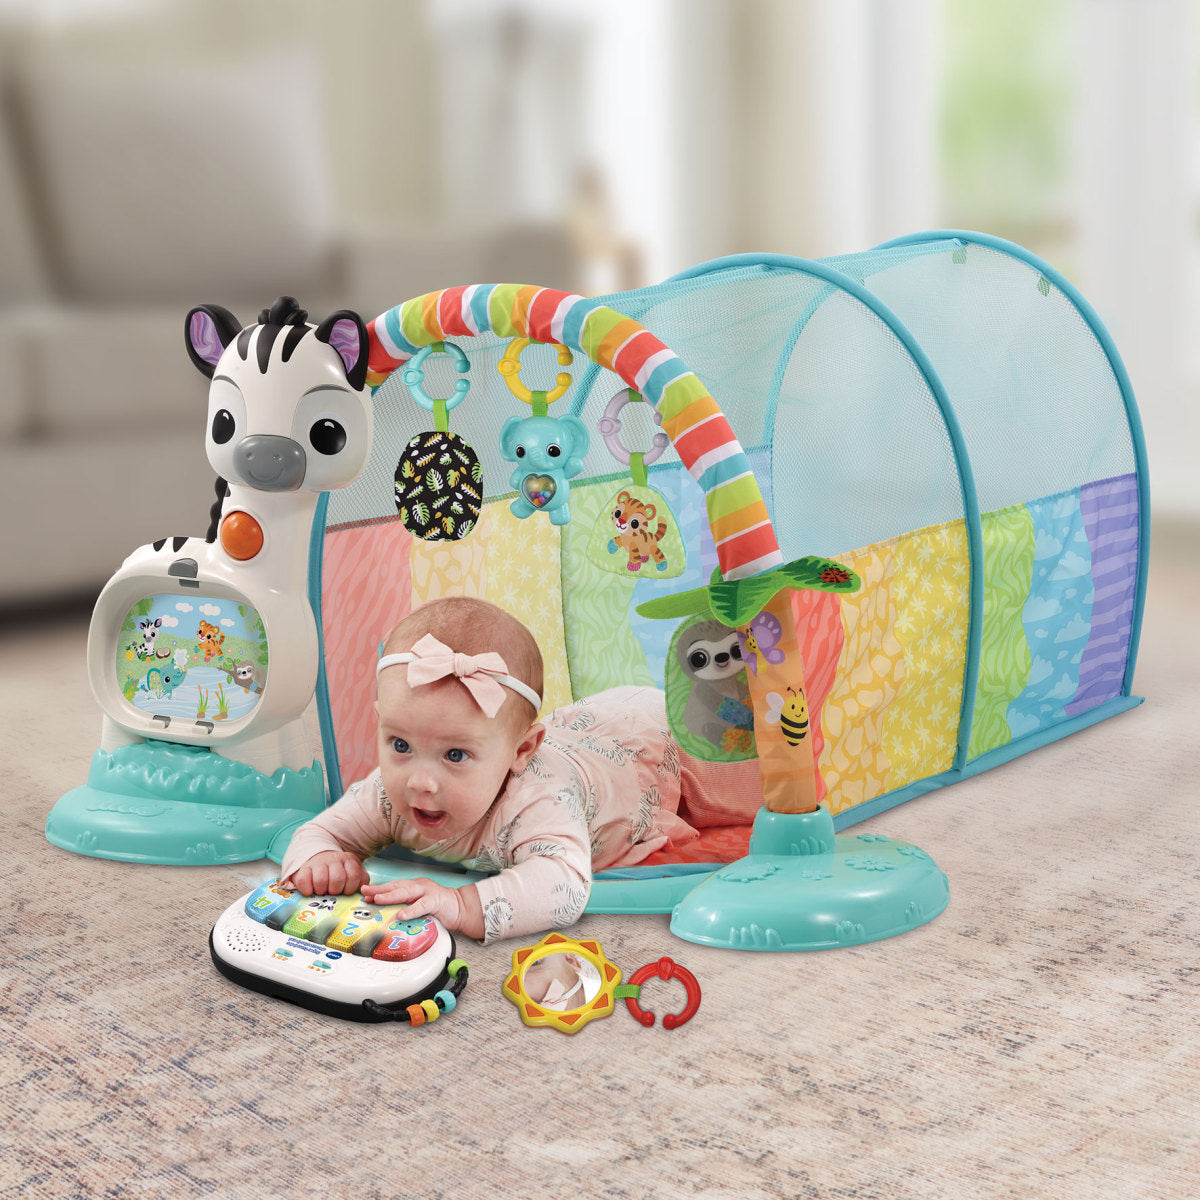 Vtech Baby 6-in-1 Super Discovery Tunnel (FR)